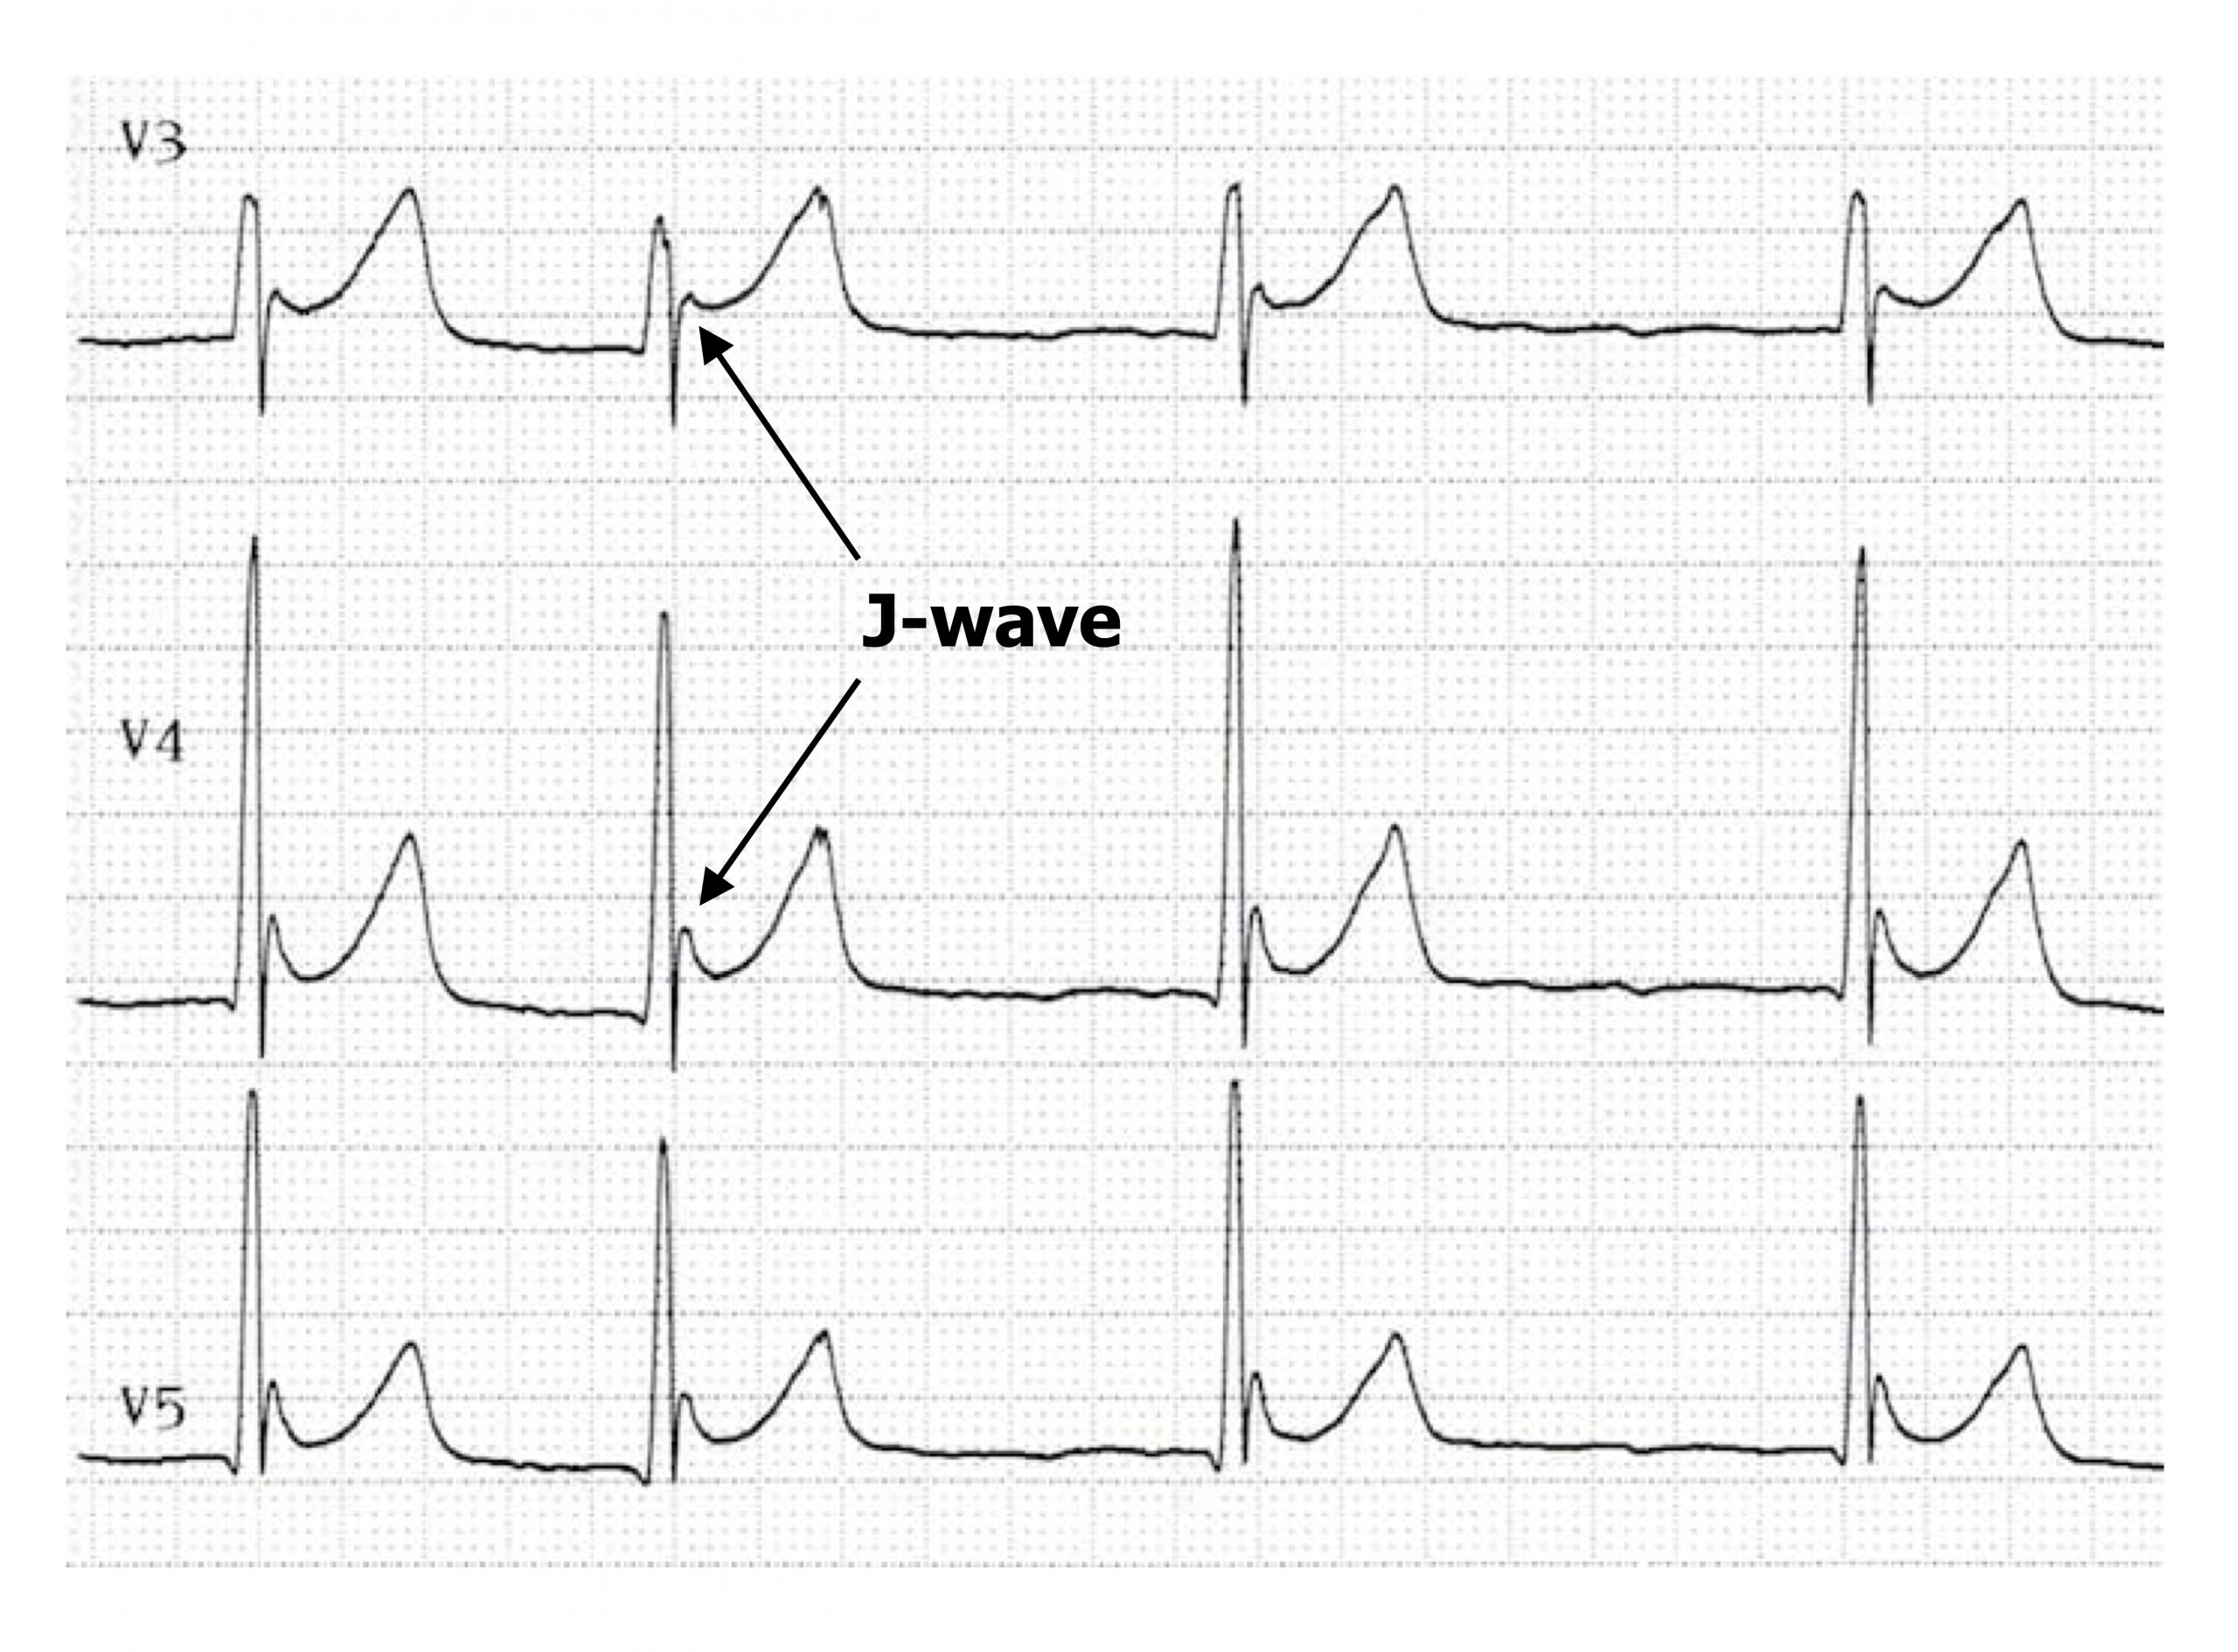 The figure shows ECGs from three leads, (V3, V4, and V5). In each lead a J-wave appears and arrows point to the J-wave in leads V3 and V4. The J-wave consists of an extra, small positive inflection after the R-wave then slopes back to the isoelectric state before the onset of a normal looking T-wave.